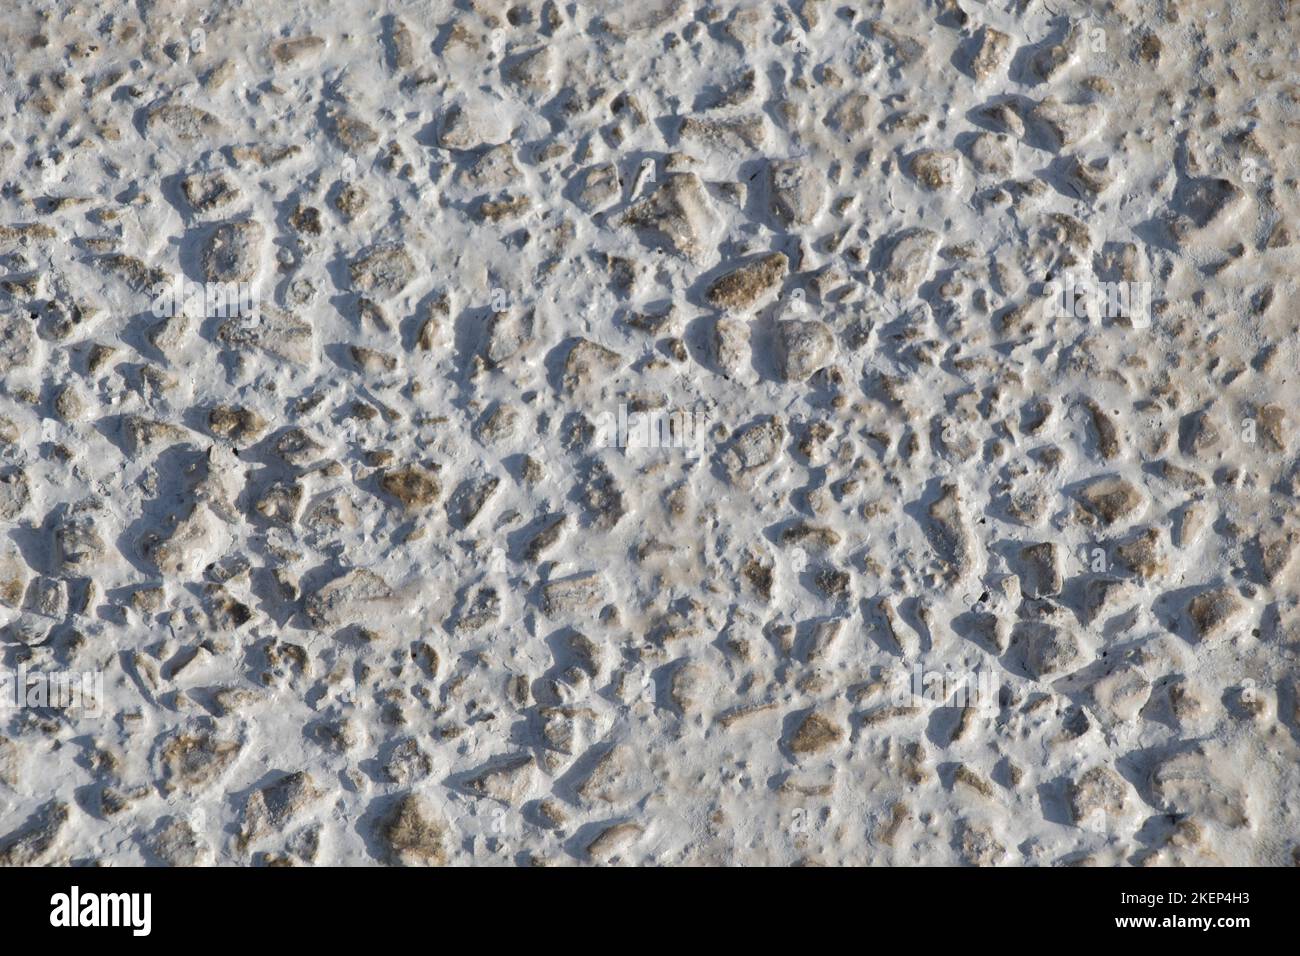 Patterns on a freshly poured concrete surface Stock Photo